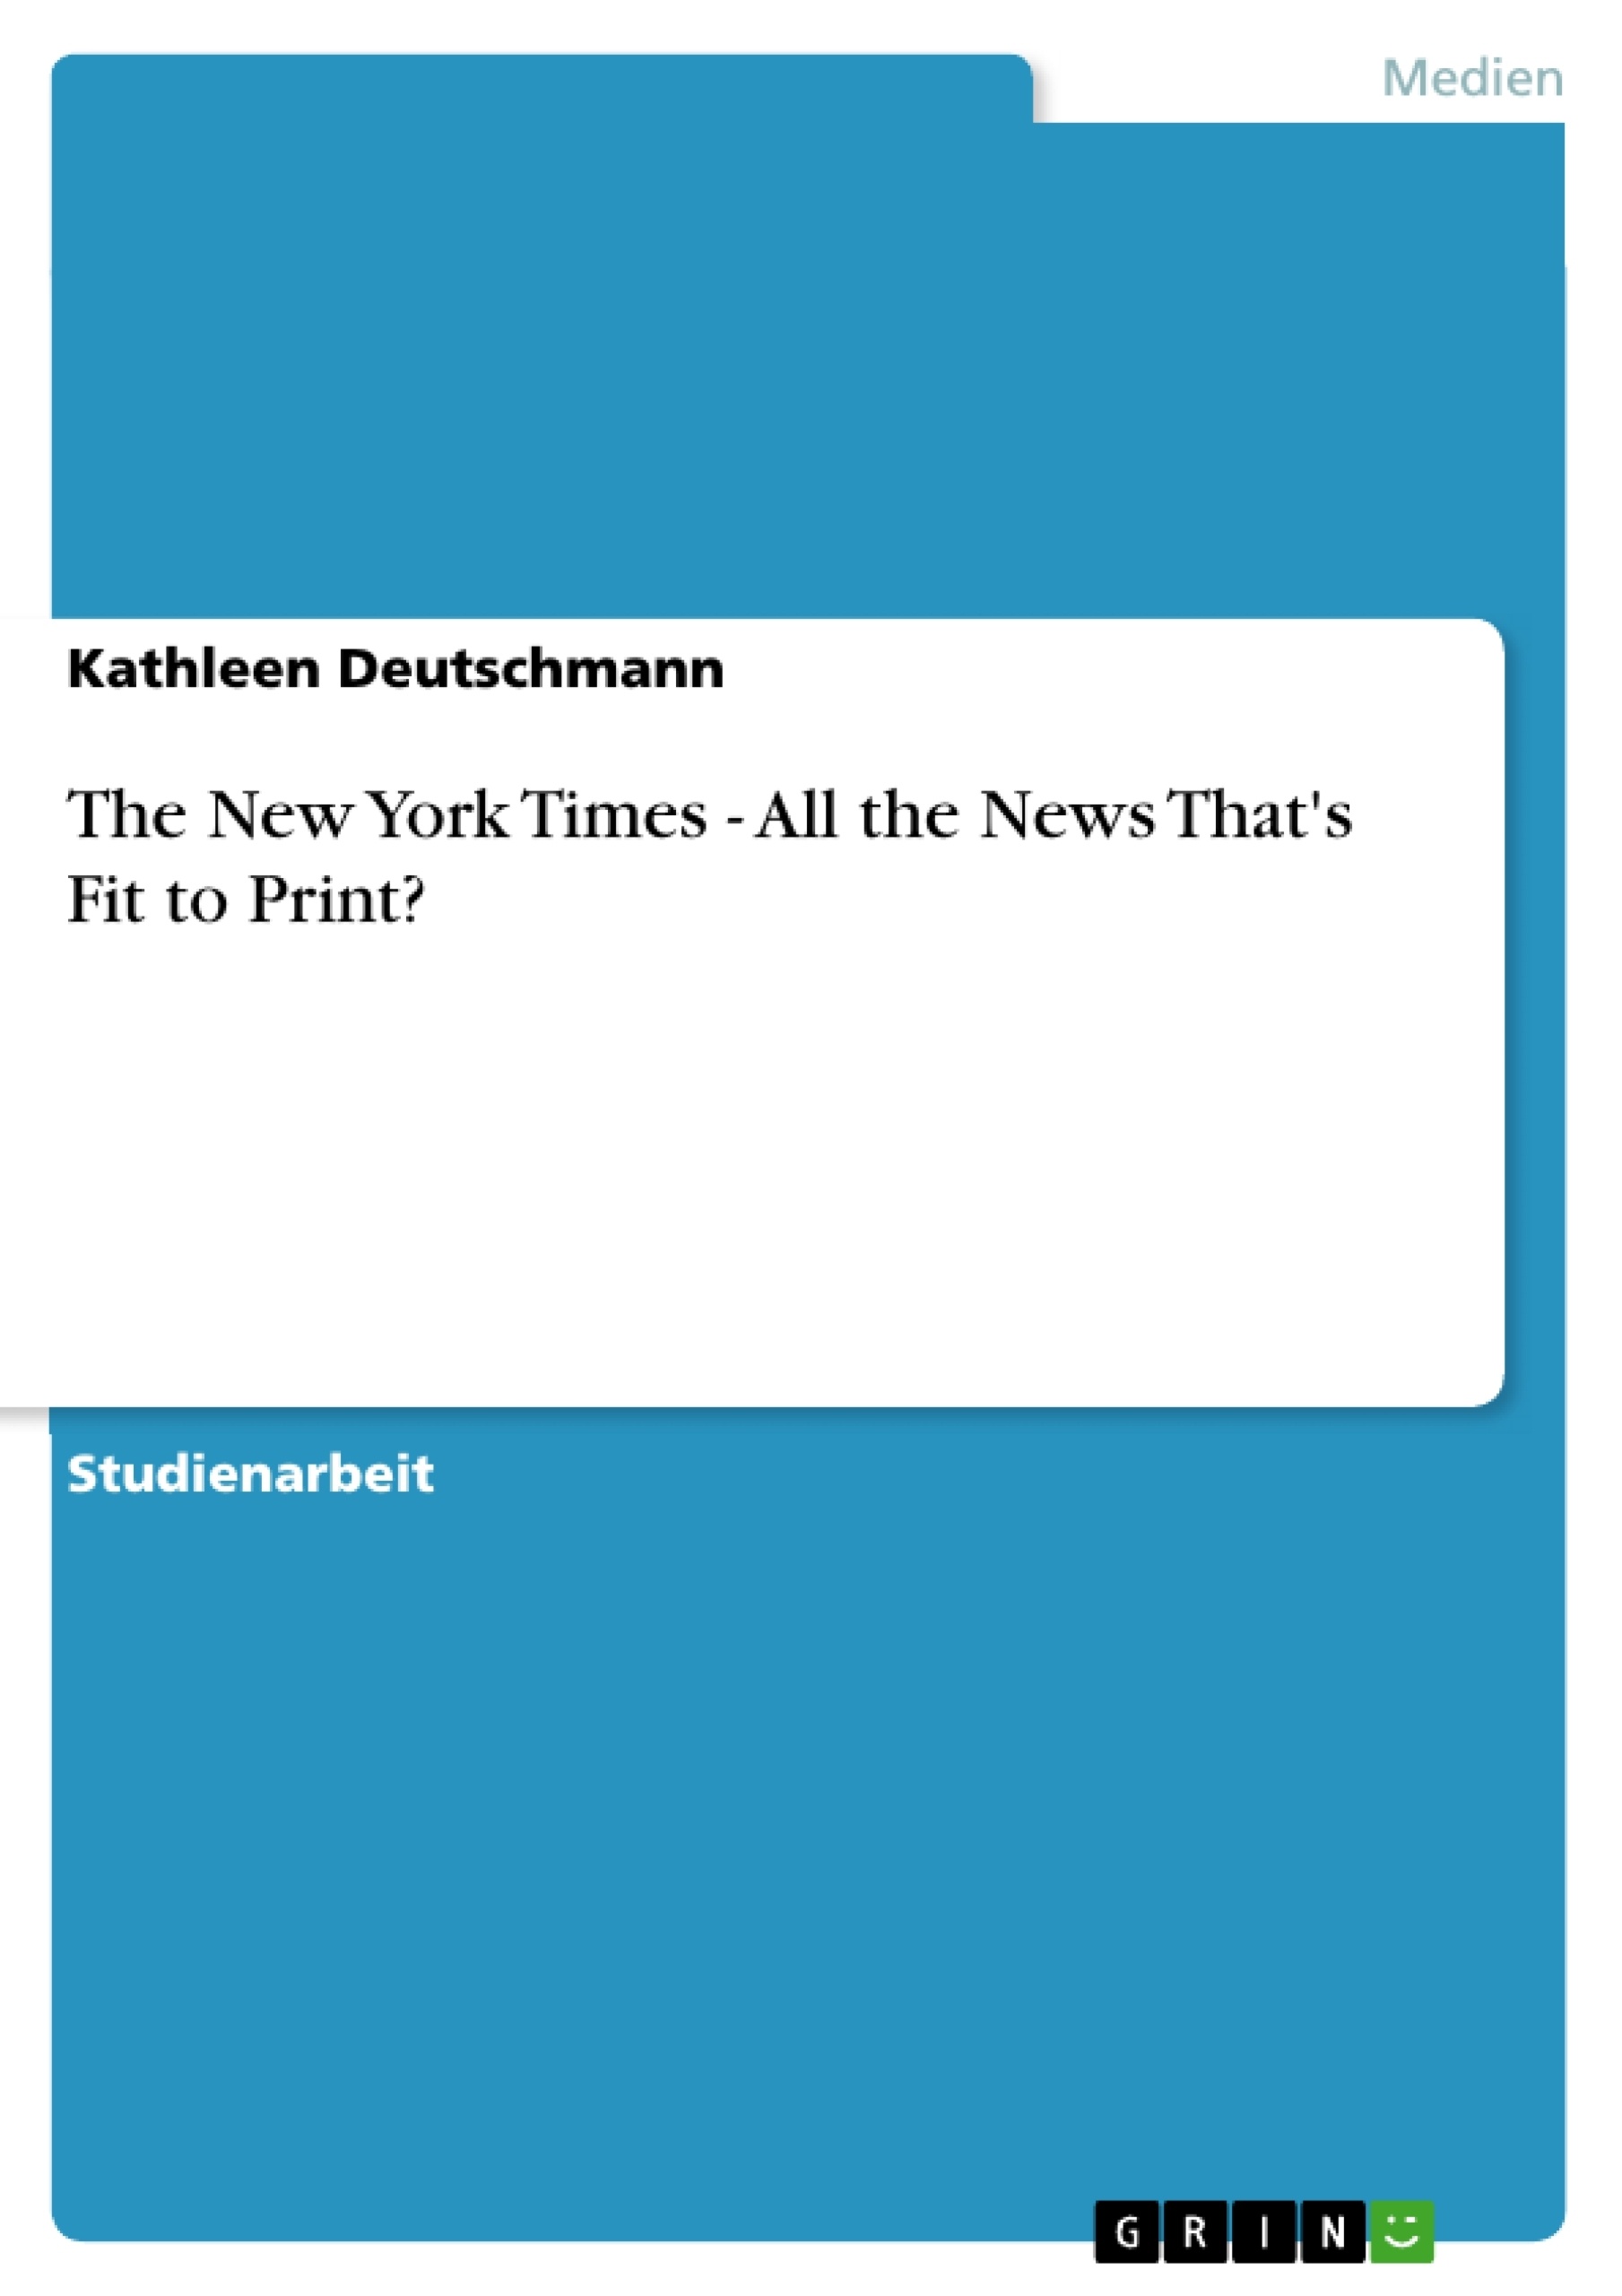 Título: The New York Times - All the News That's Fit to Print?